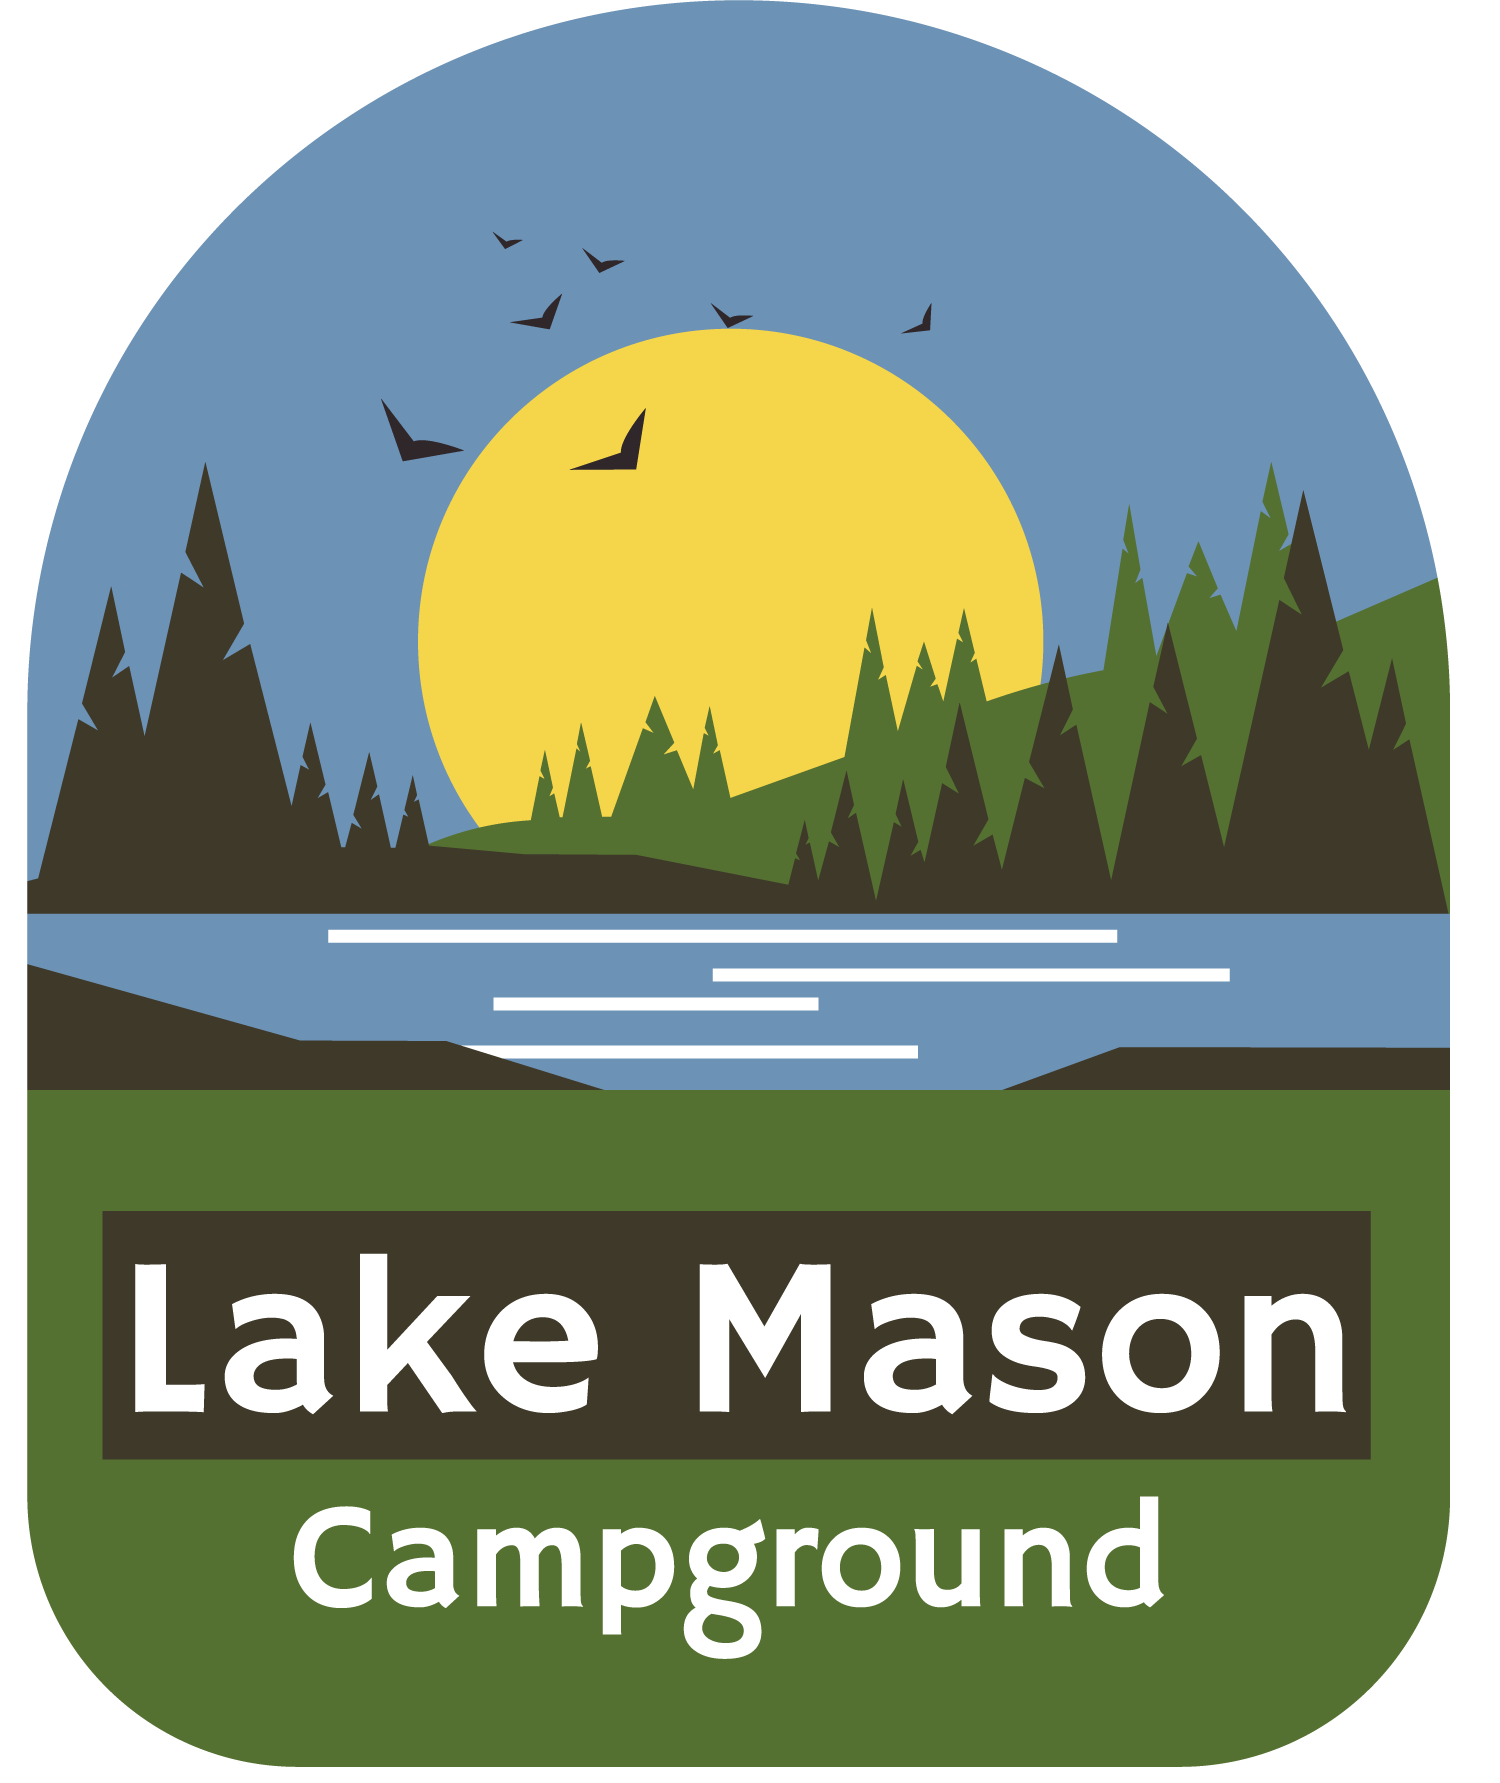 A black and white logo for lake mason campground